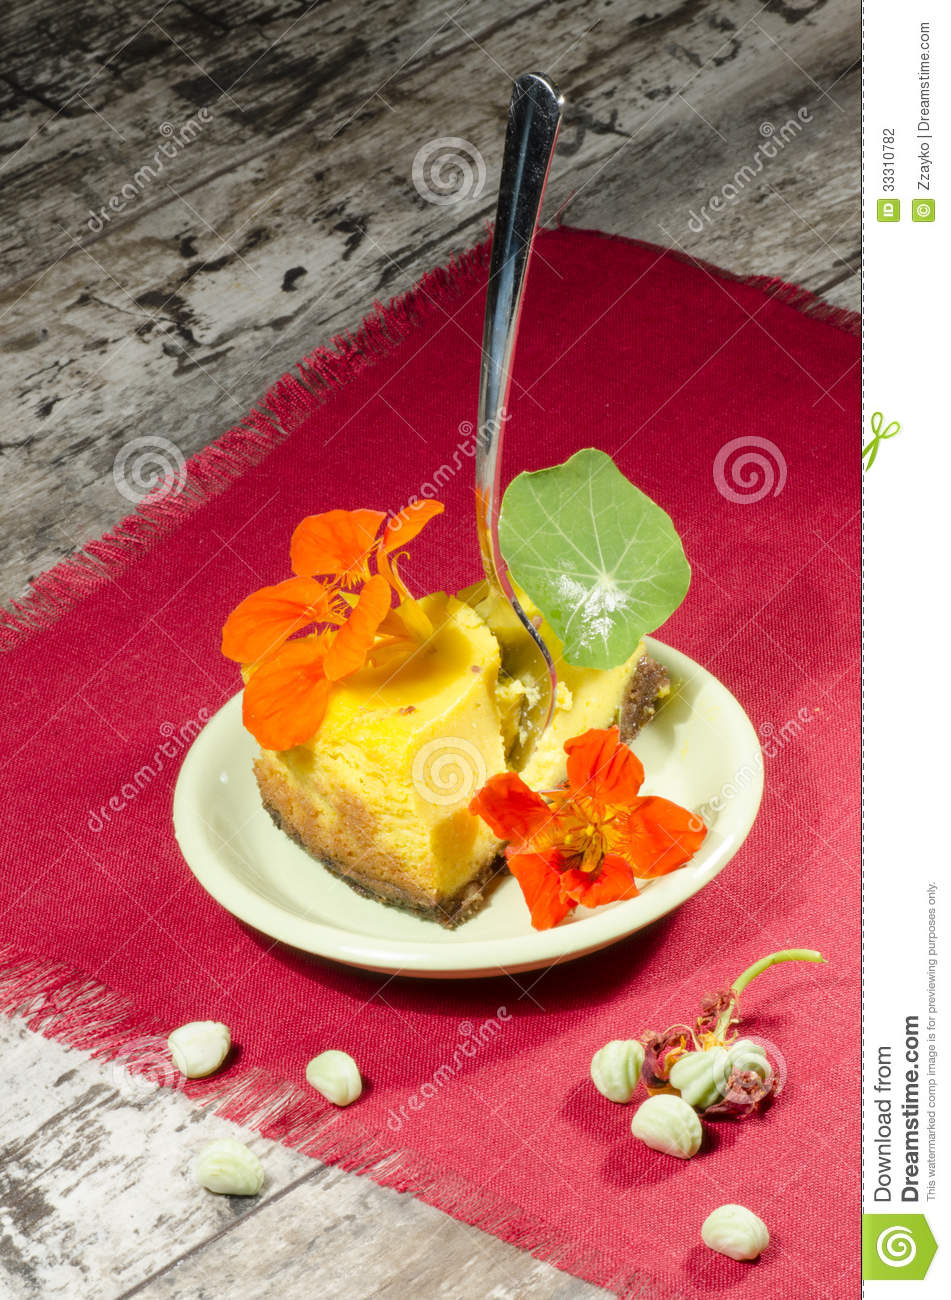 Pumpkin Cheesecake Decorated With Fresh Flowers  From The Series